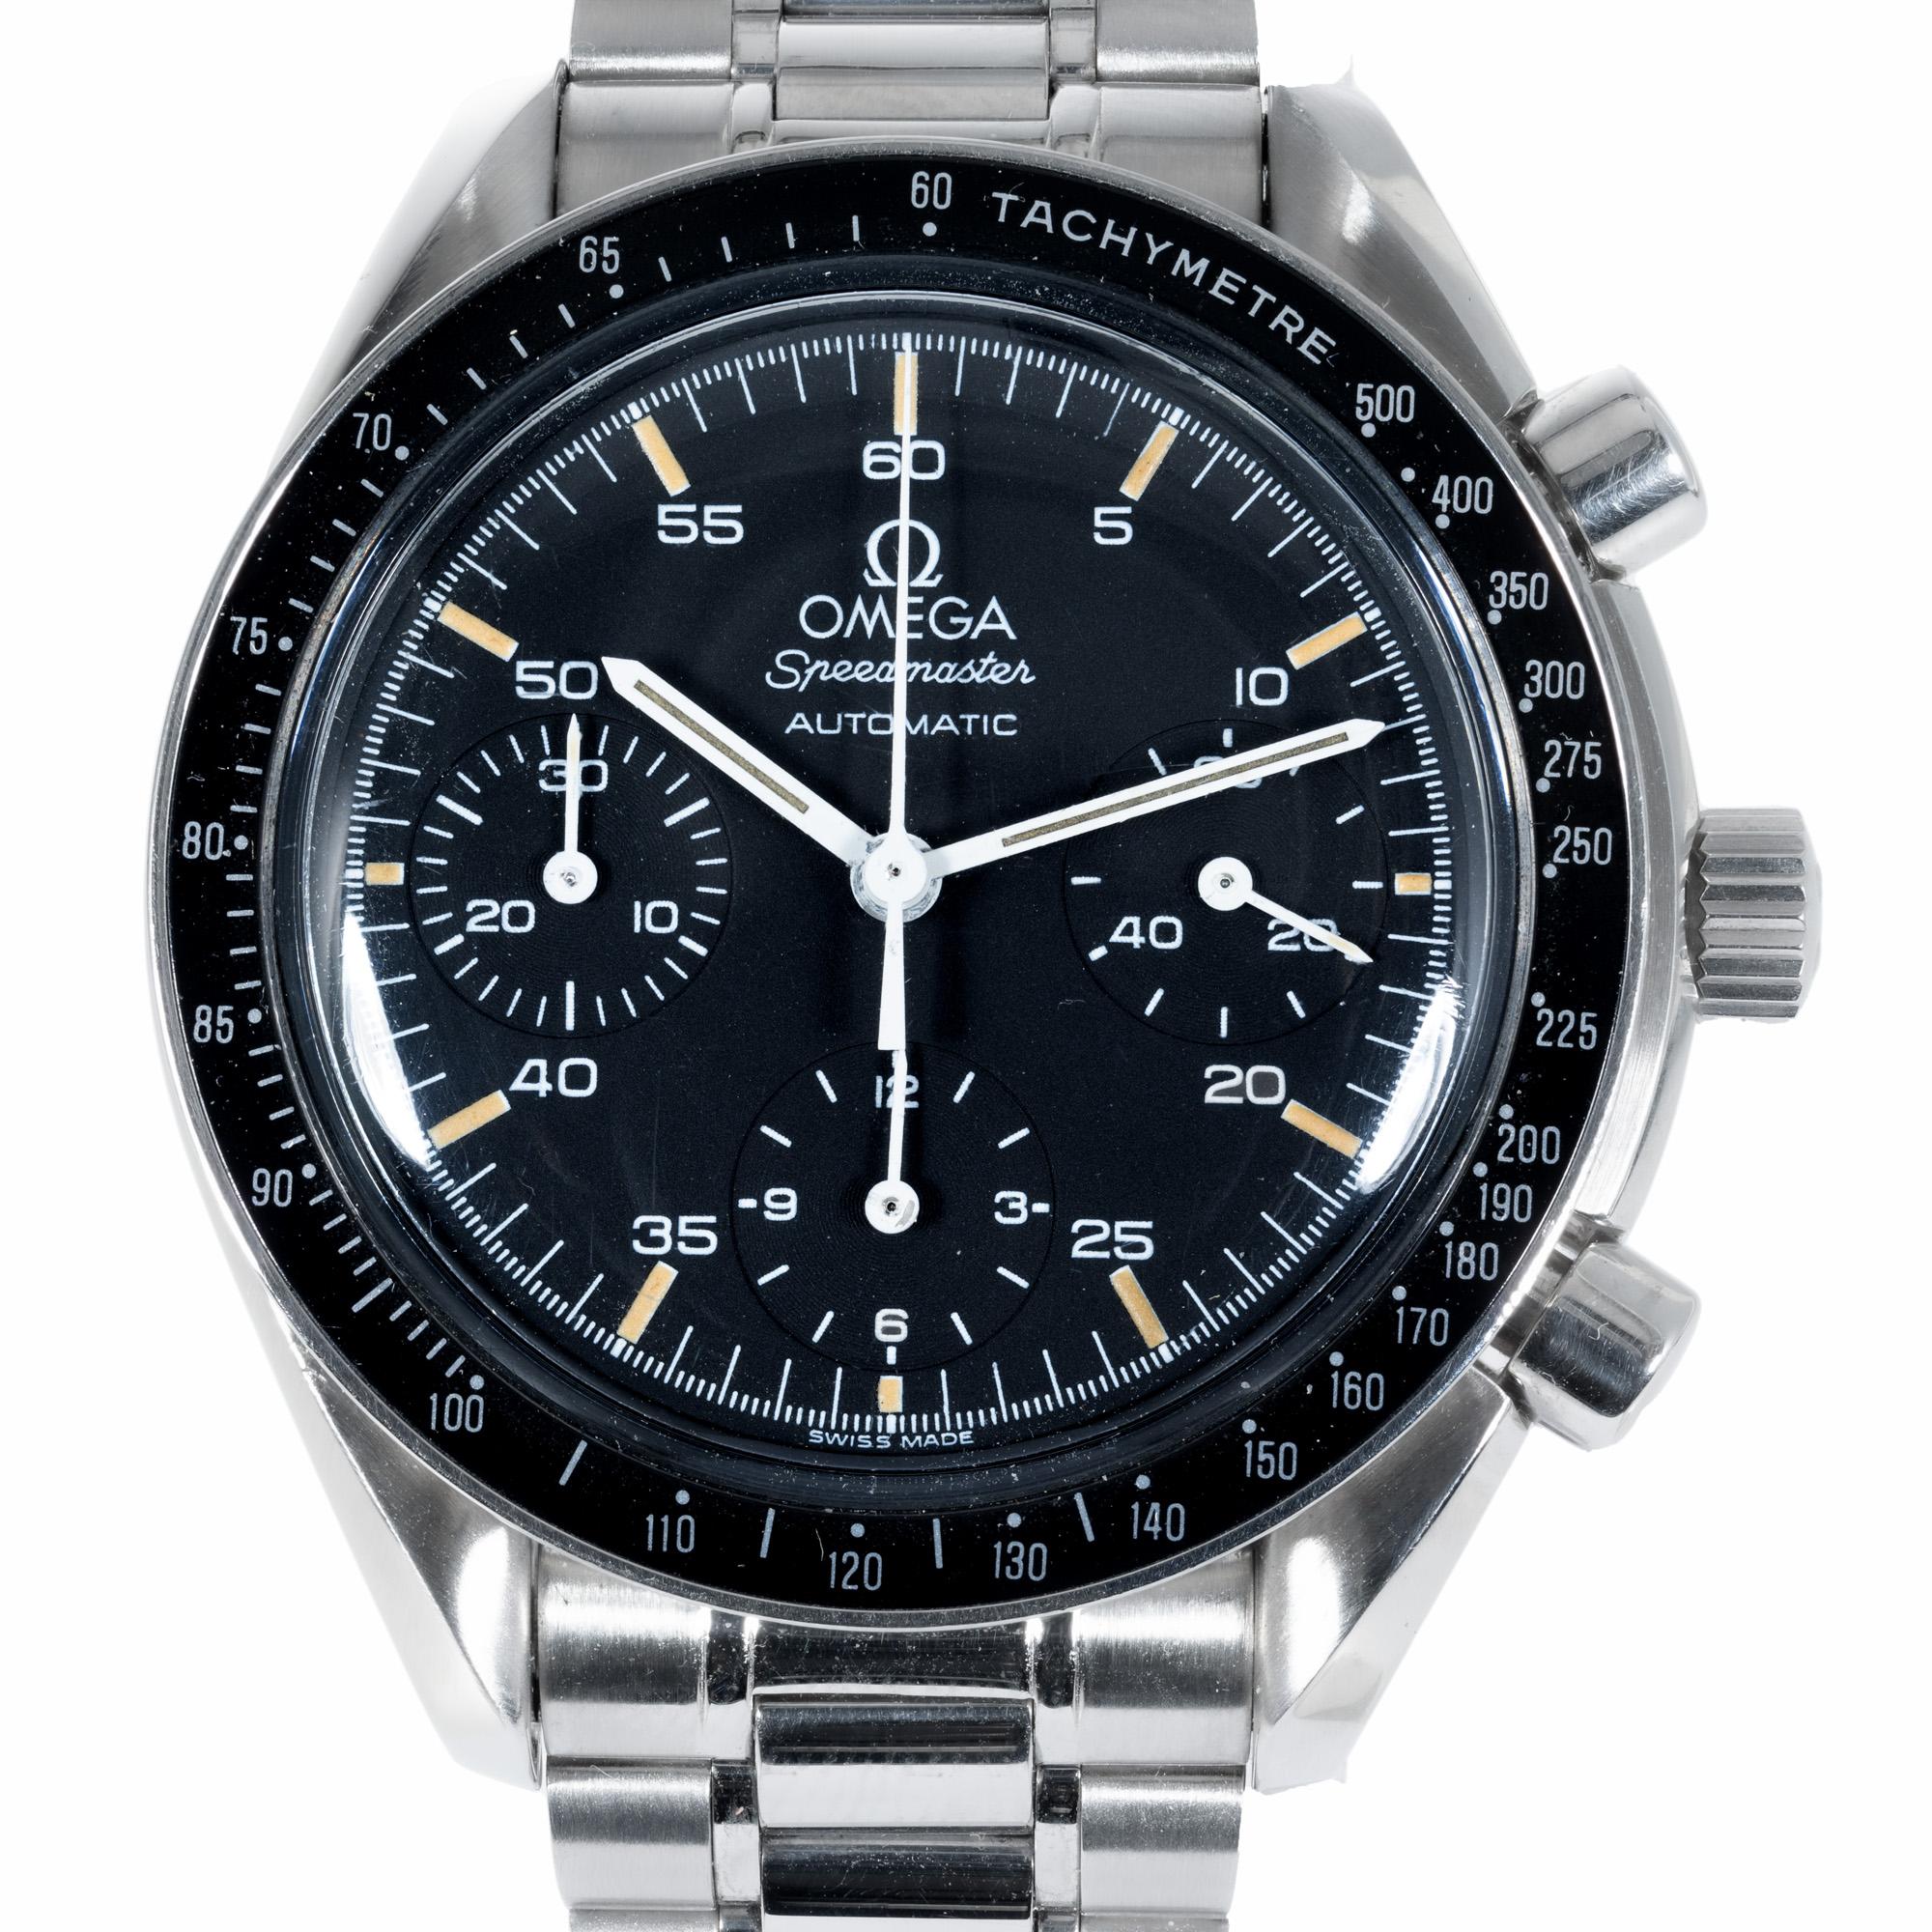 Excellent mens 1141 Omega speedmaster Hesalite chronograph. Warranty card. No box. Circa 1996-1997.  39mm diameter. Automatic self-winding chronograph movement. Stainless steel bezel with black dial and tachymeter function. Three chronograph